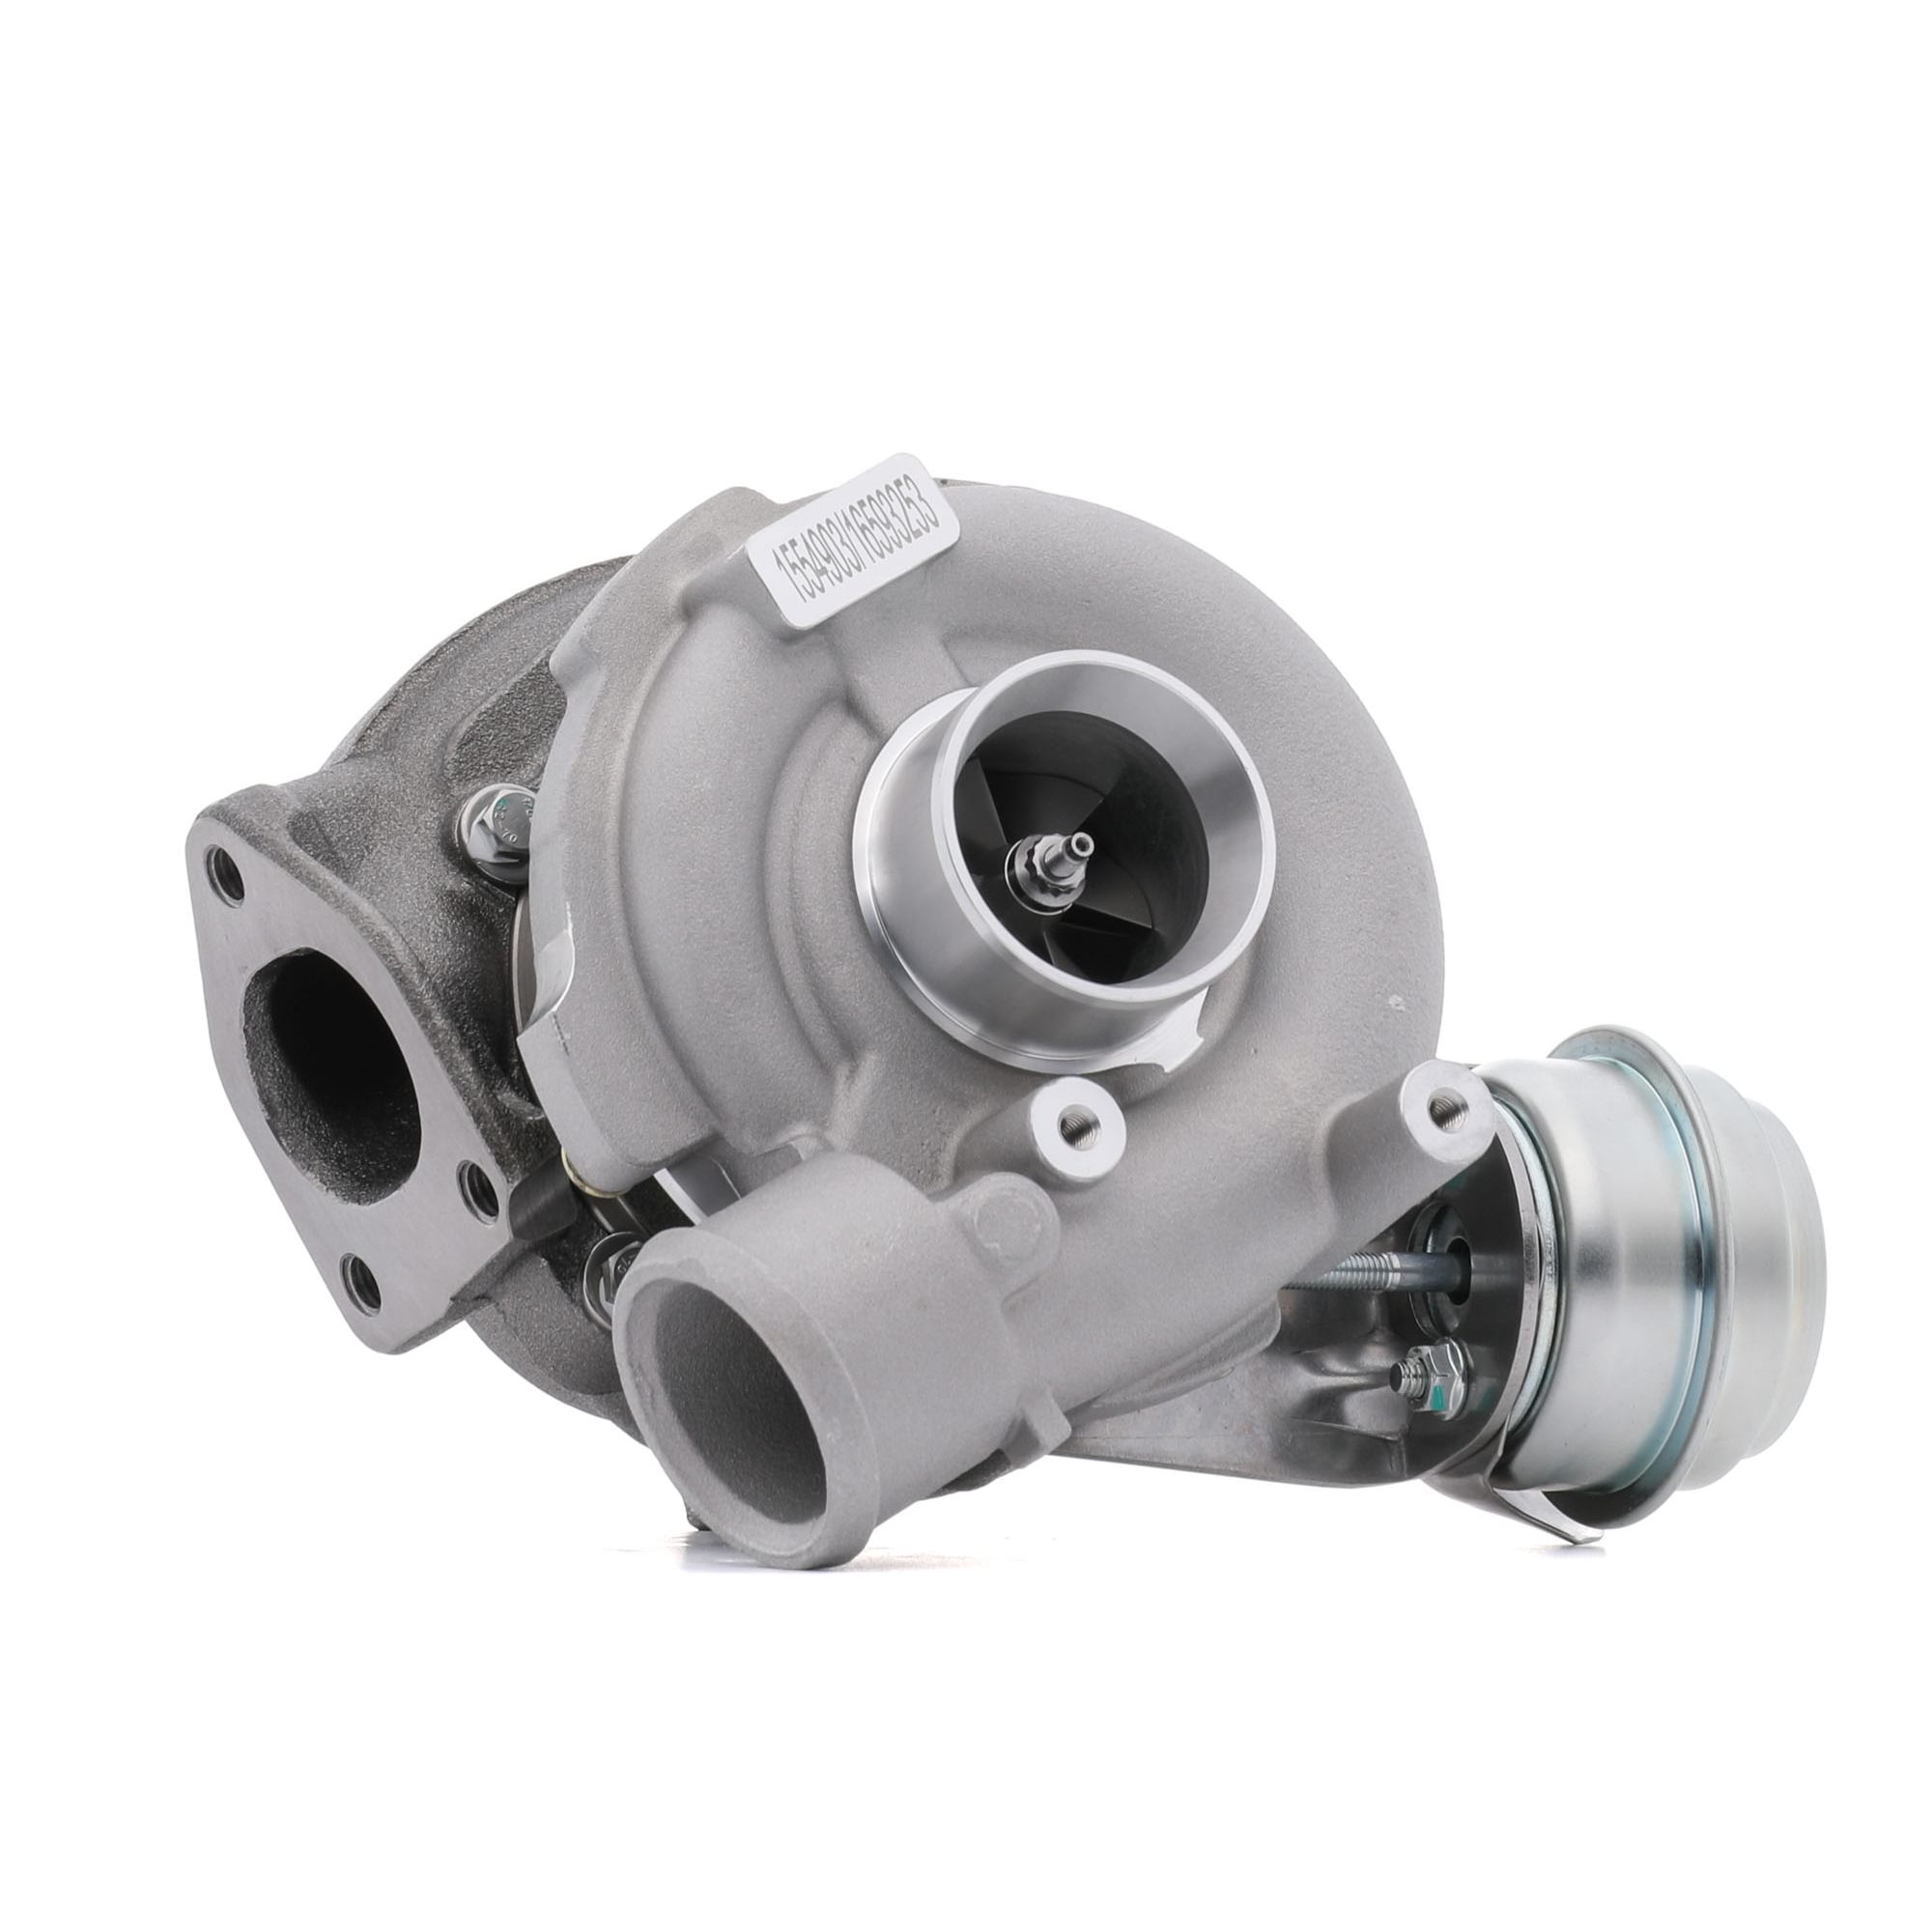 STARK SKCT-1190318 Turbocharger Exhaust Turbocharger, with gaskets/seals